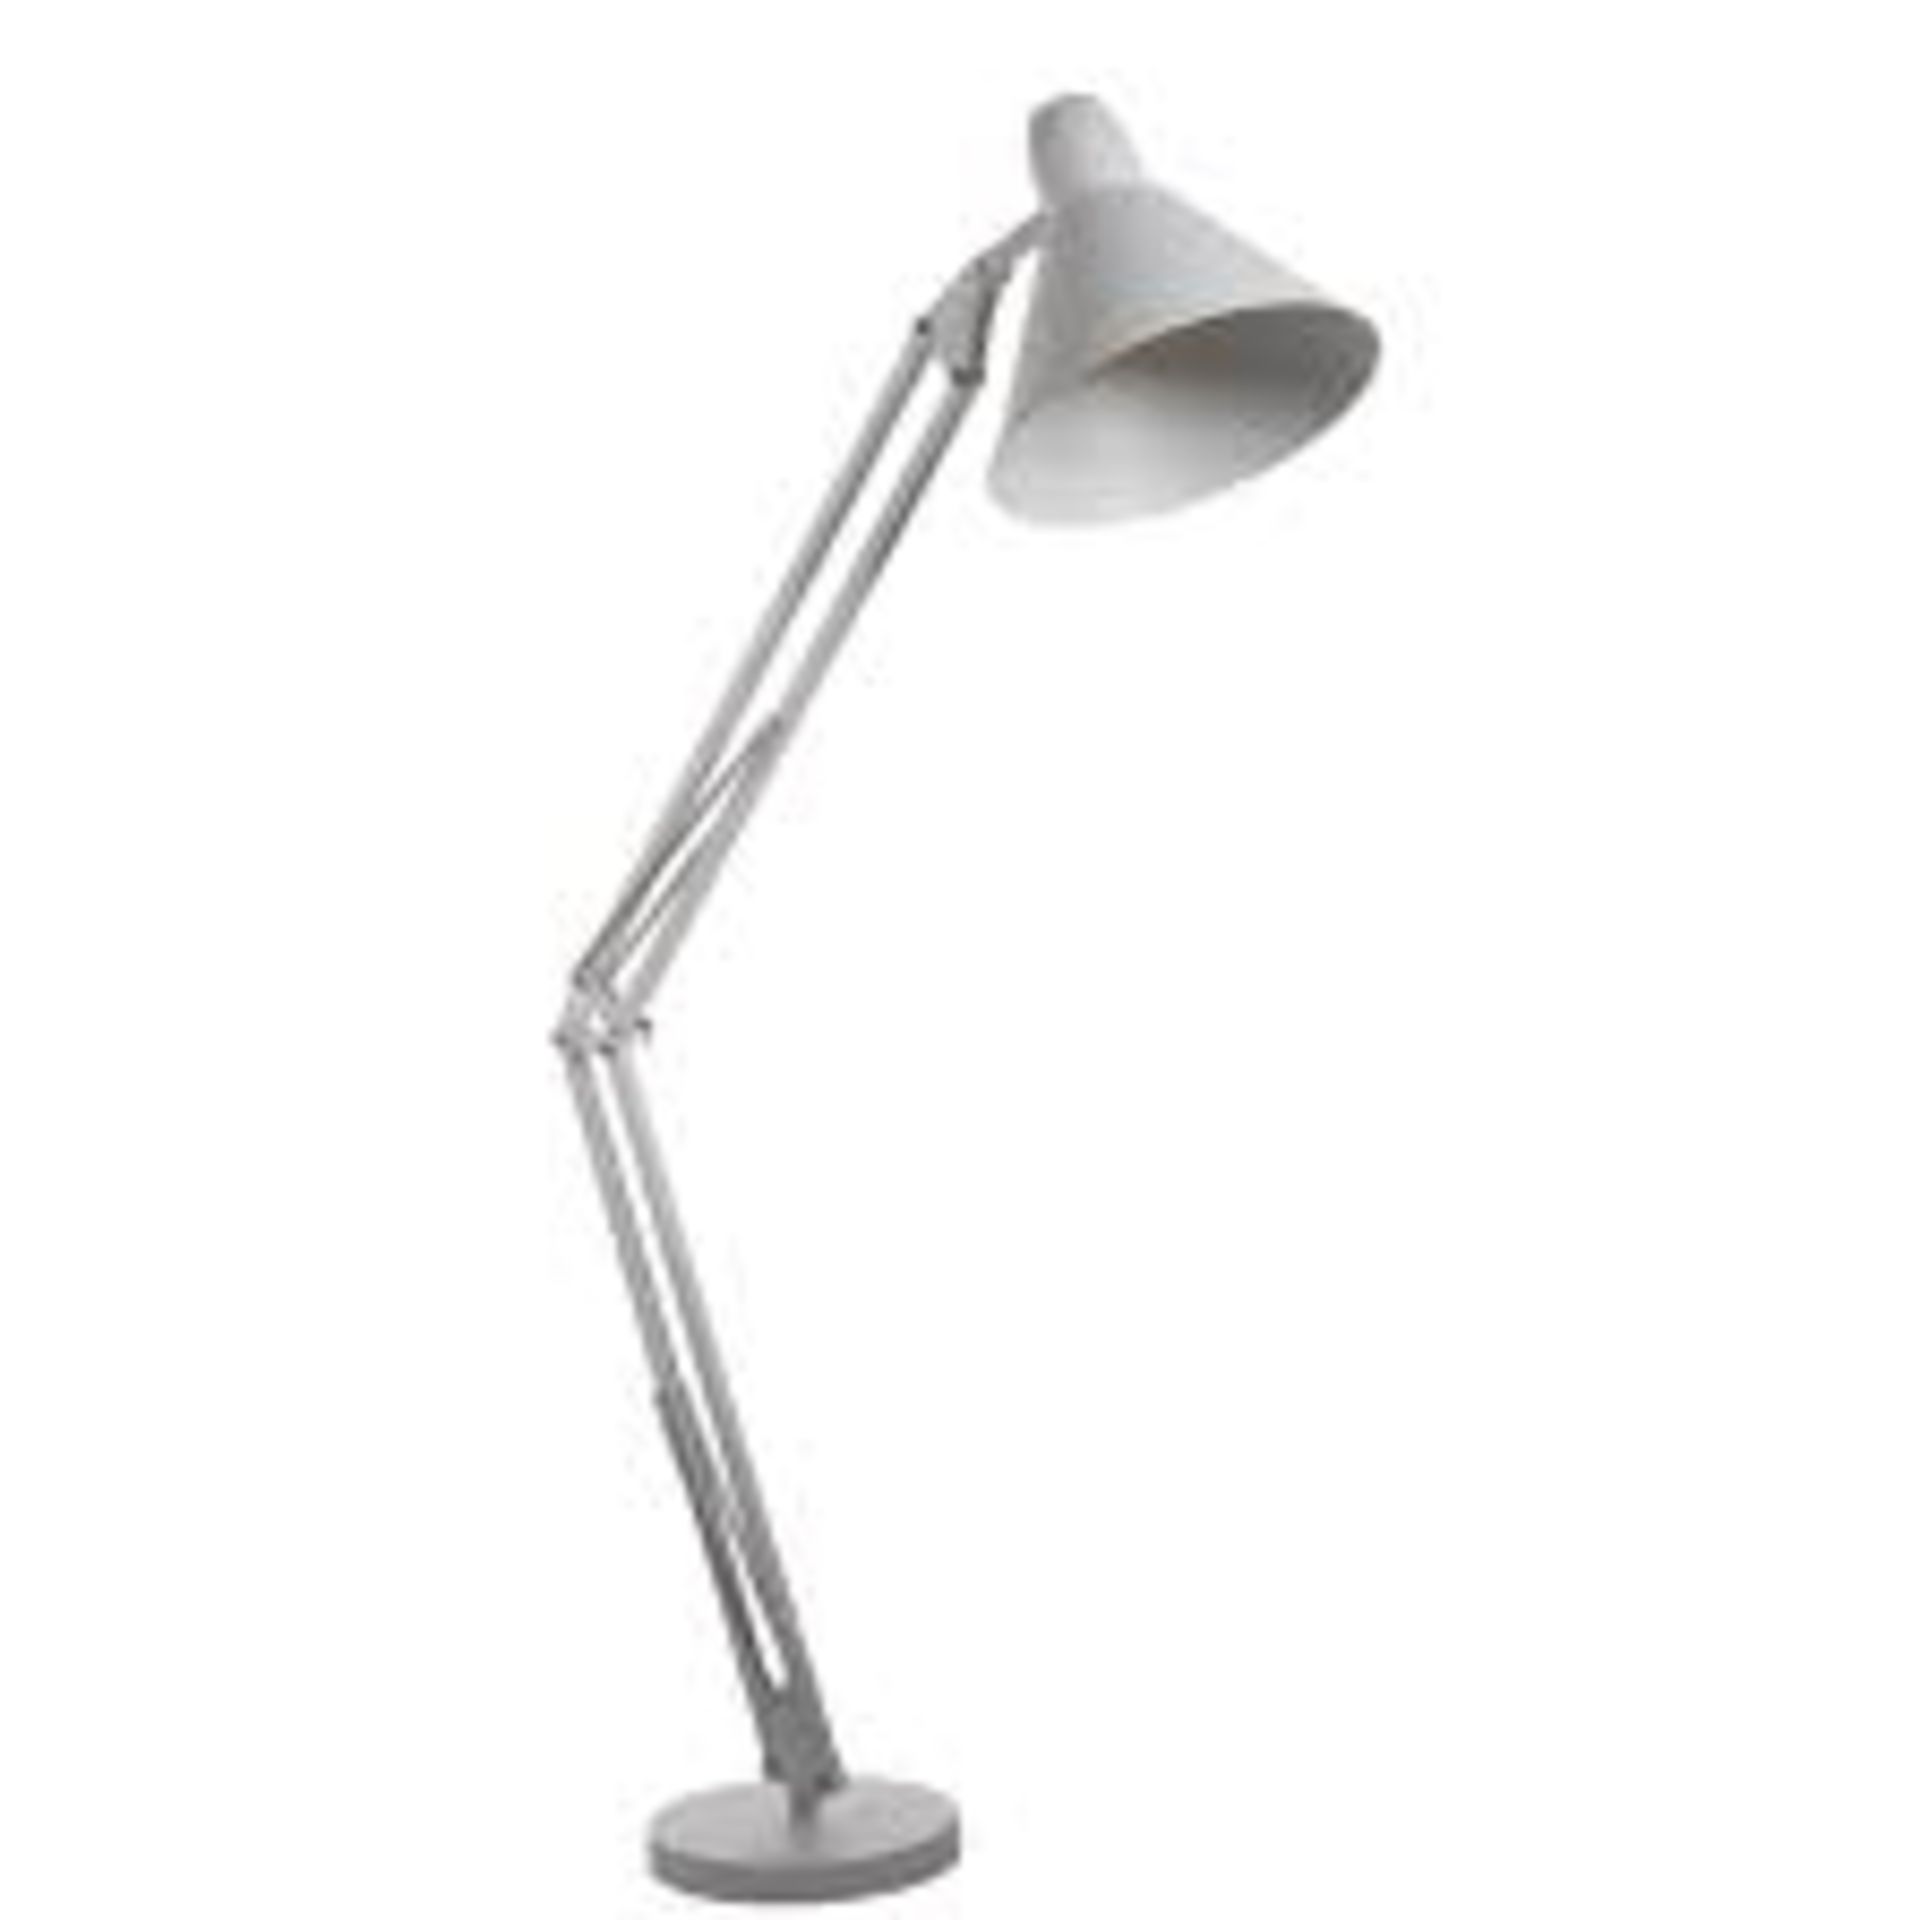 1 x Searchlight Hobby Floor Lamp in matt white- Ref: 7073WH - New and Boxed - RRP: £180 - Image 3 of 4